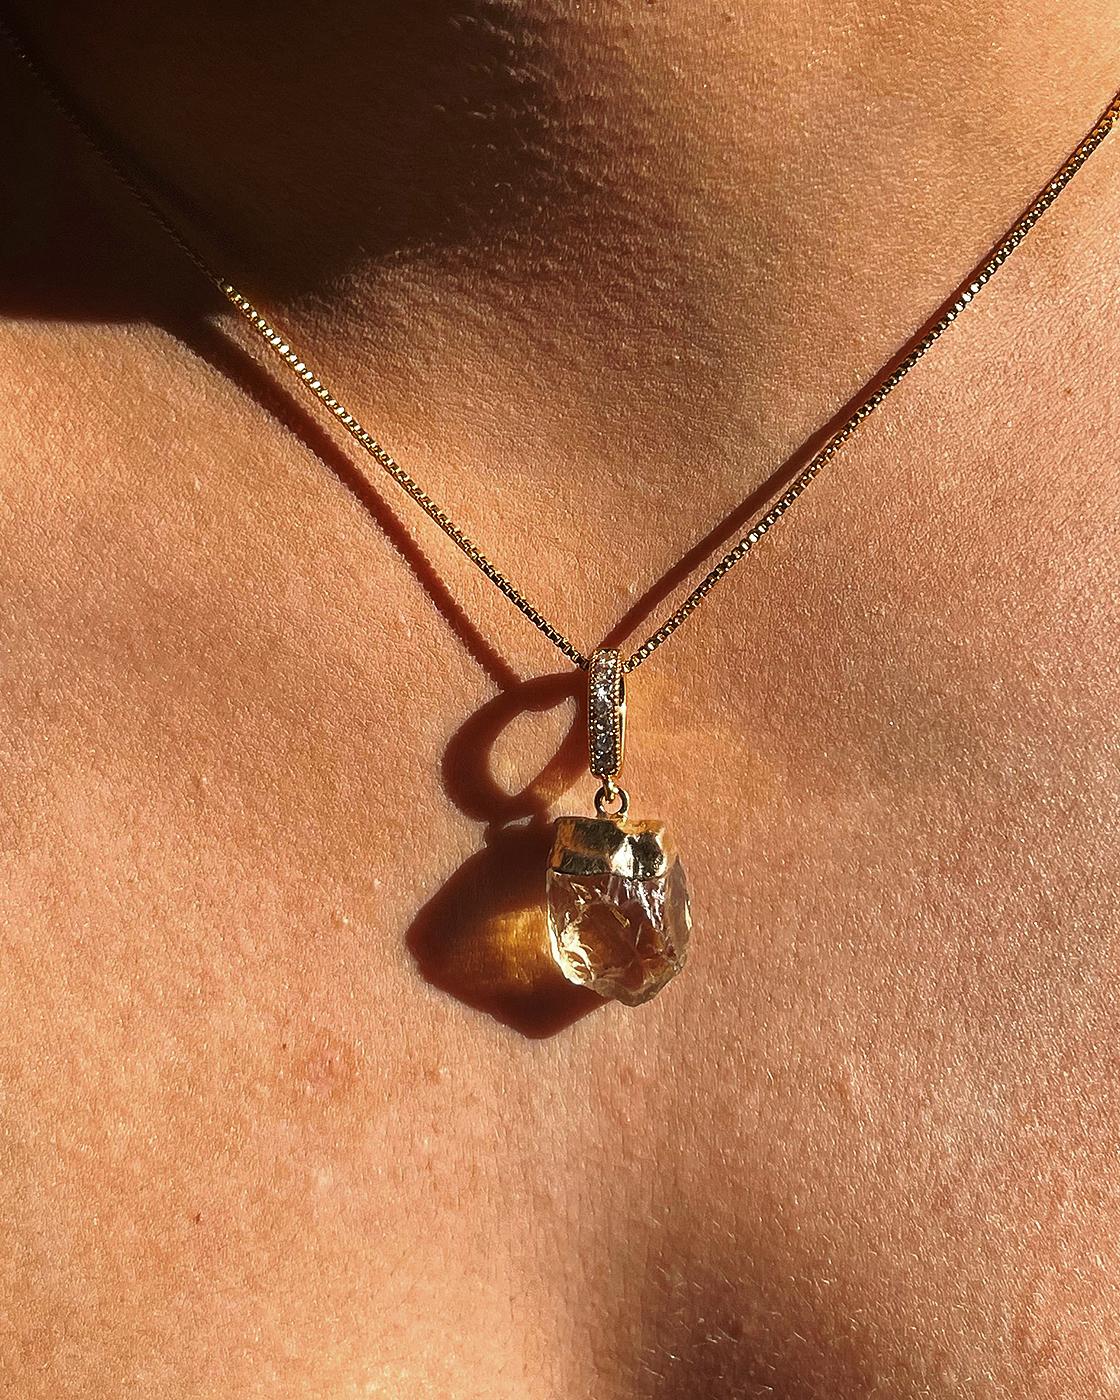 Citrine Gold-Plated Cubic Zirconia Pendant with Pave connector